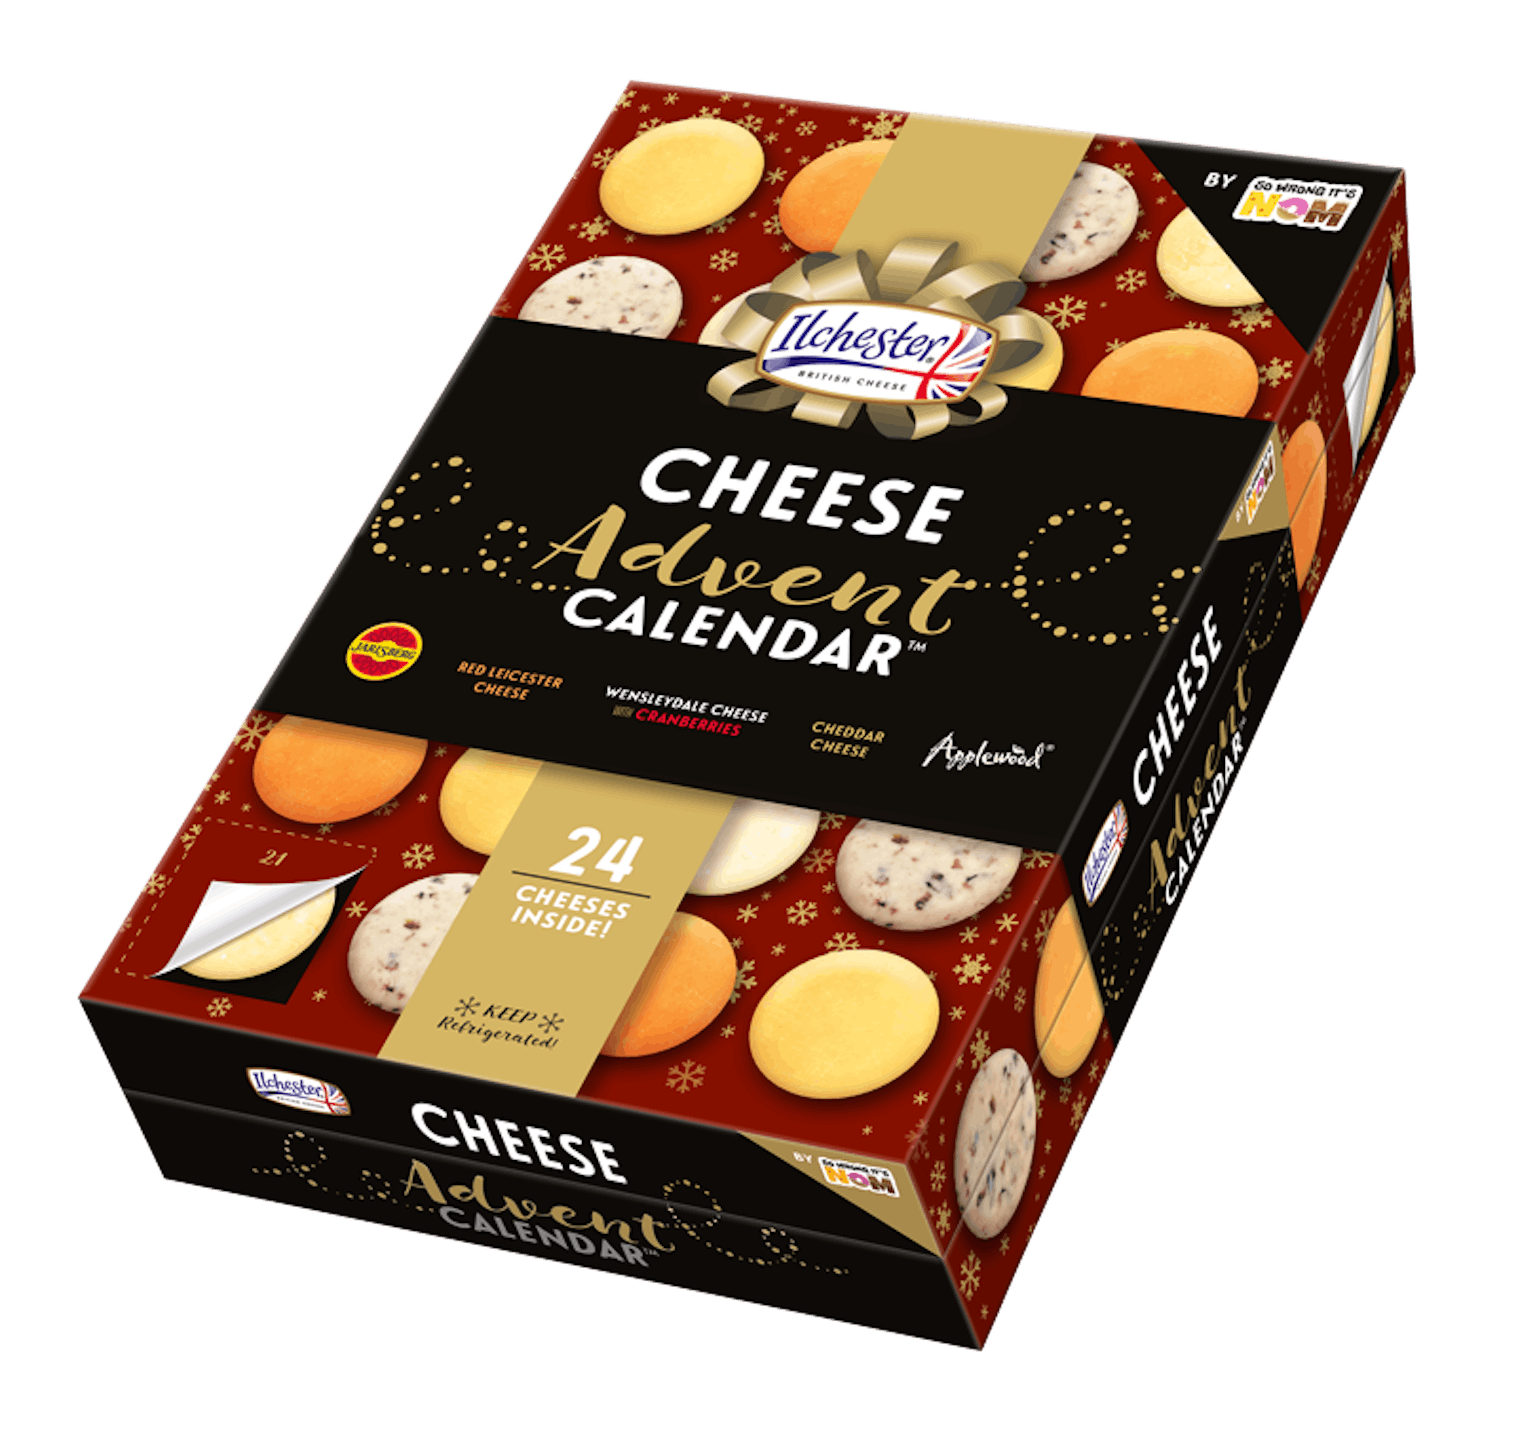 Where Can I Buy The Cheese Advent Calendar? It's Going To Sell Fast, So